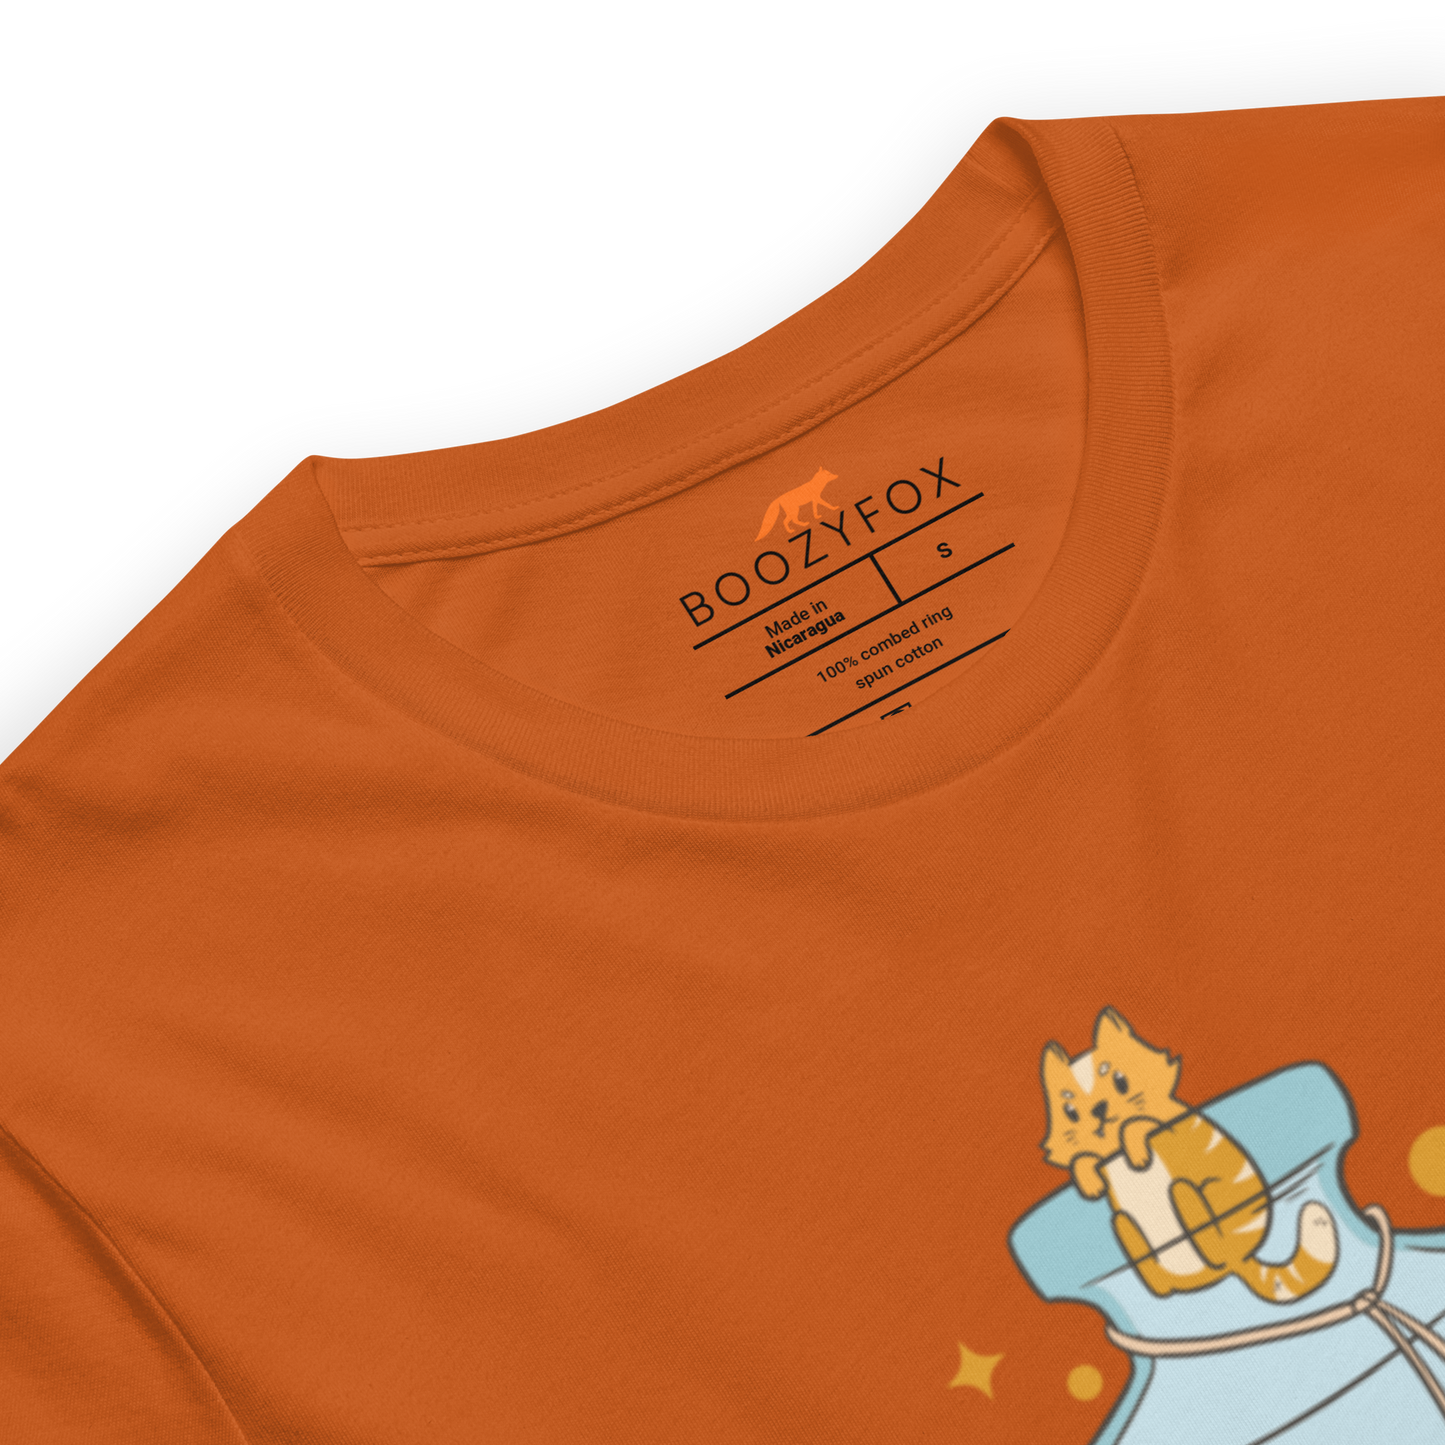 Product details of a Autumn Colored Premium Cat T-Shirt featuring a funny Anti-Depressants graphic on the chest - Cute Graphic Cat Tees - Boozy Fox